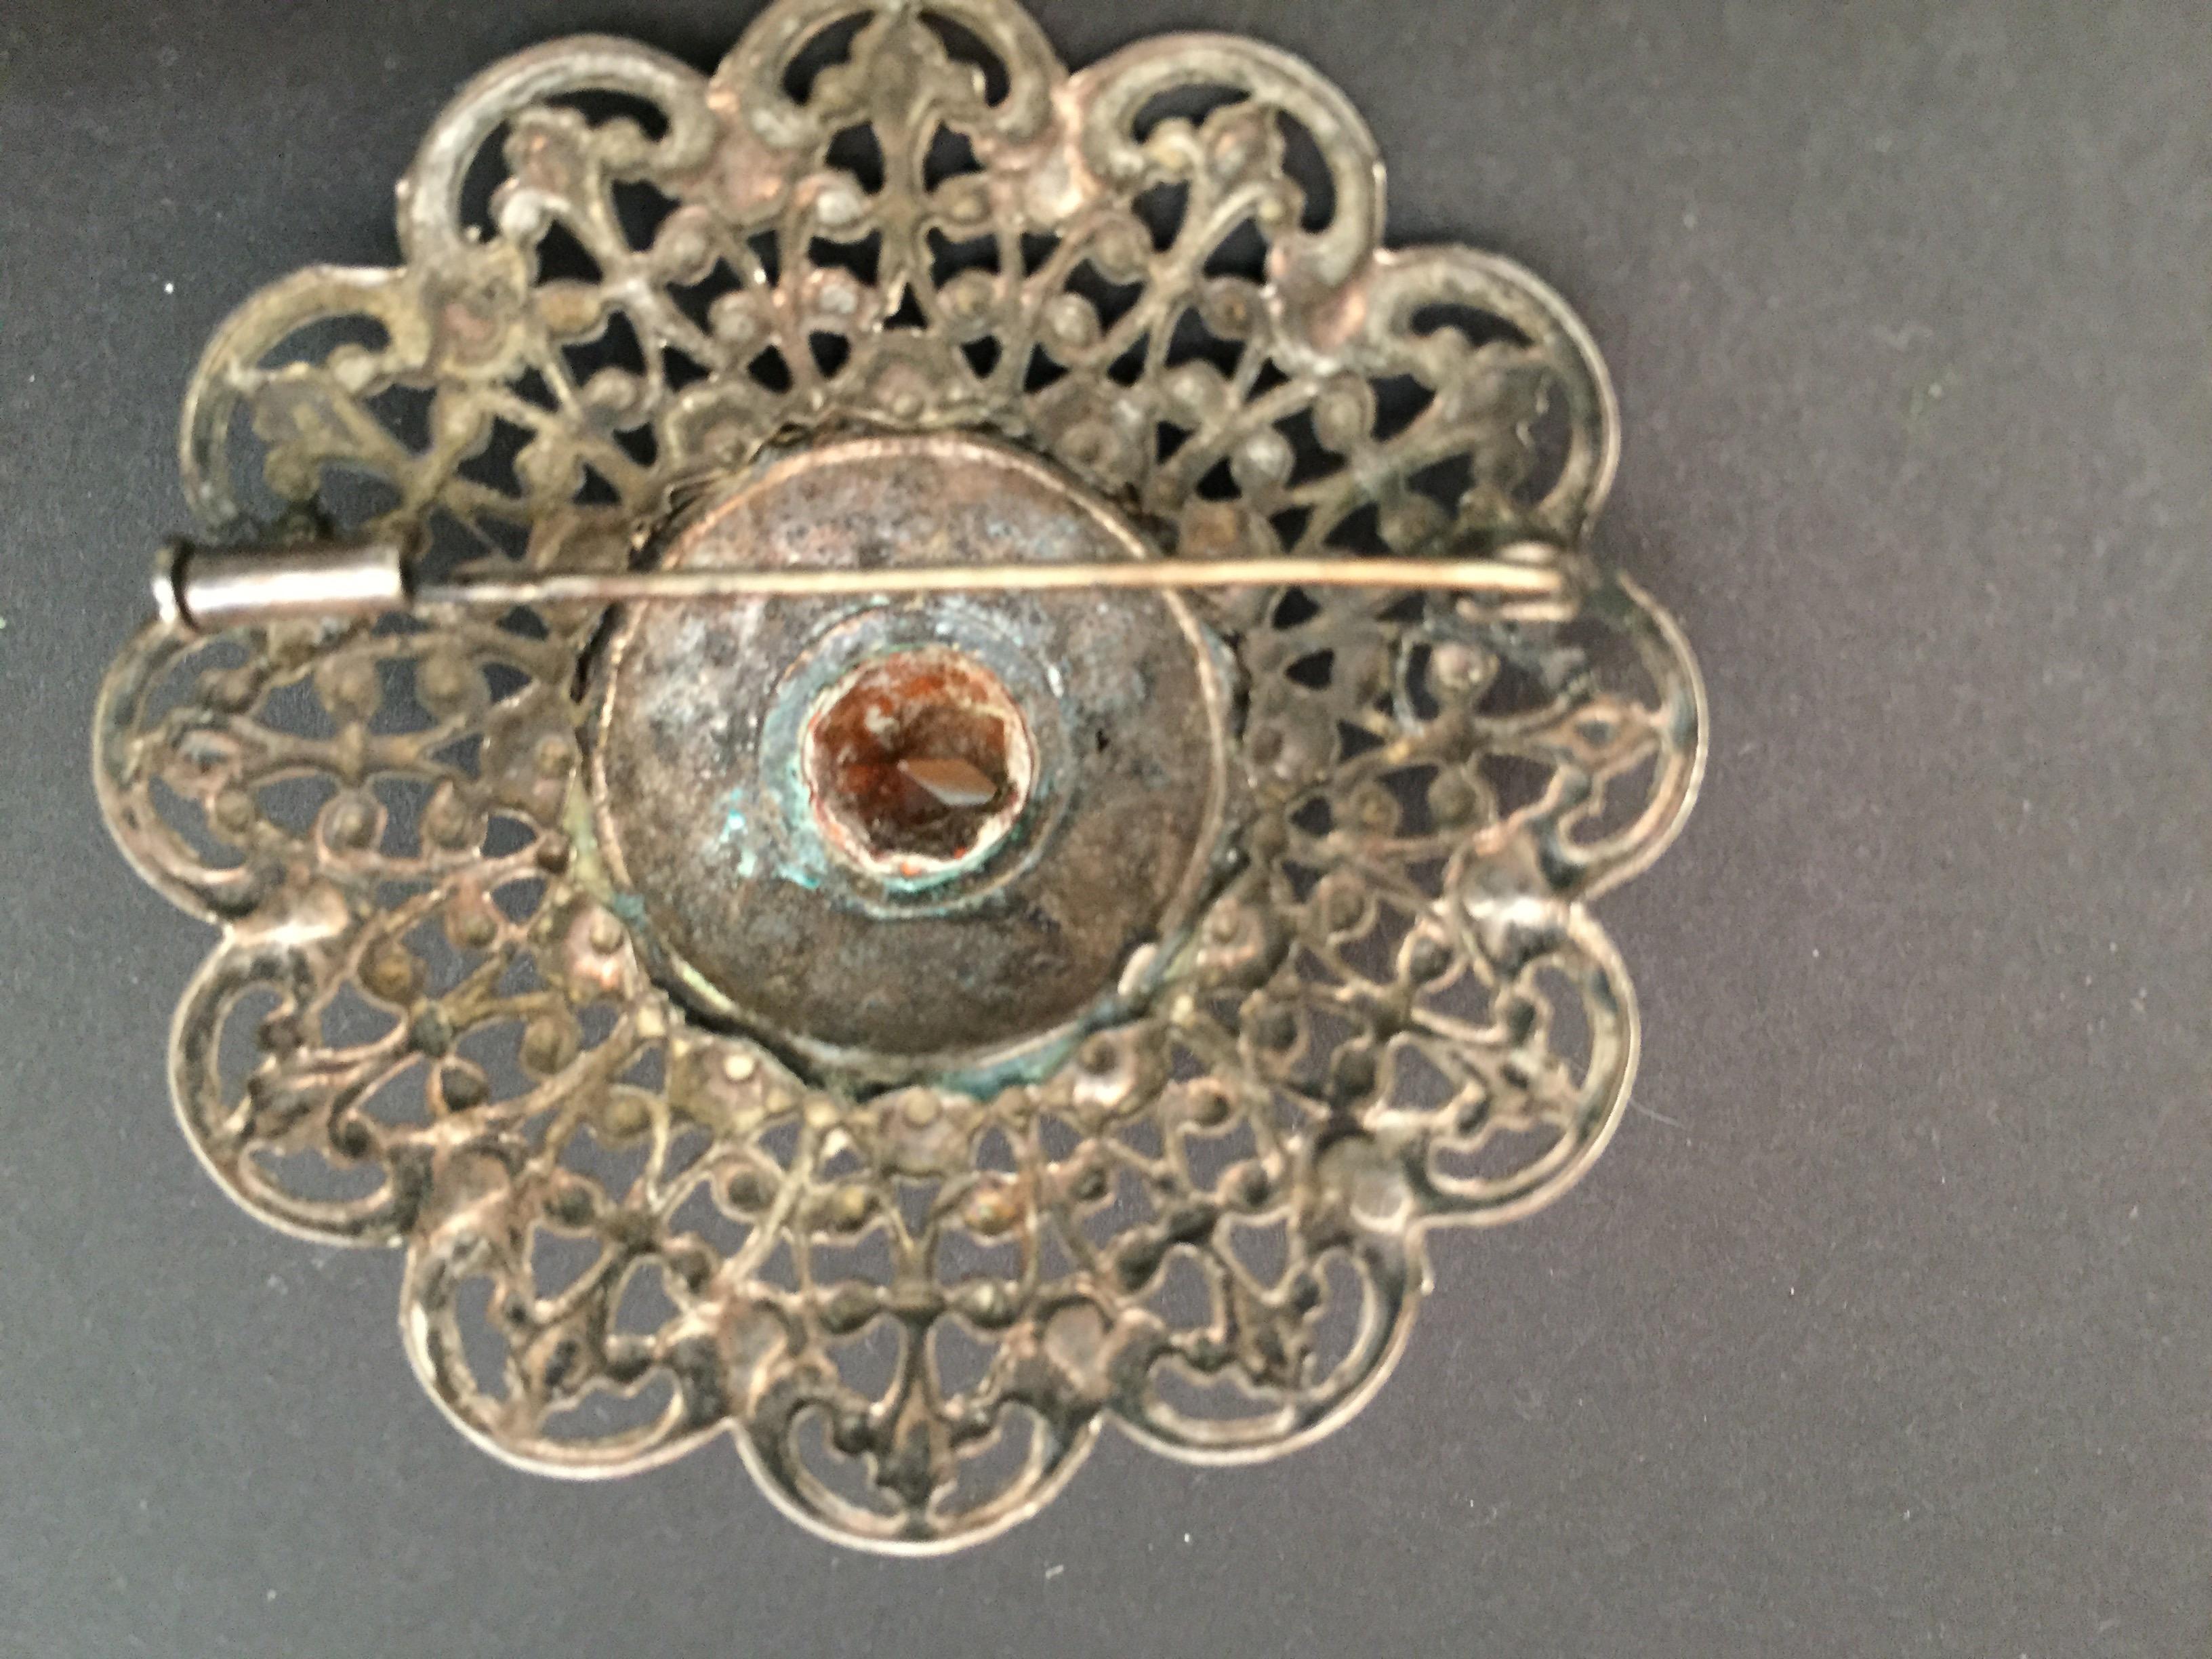 Hand-Crafted Ottoman Style Turkish Silver Brooch or Veil Pin with Moorish Filigree